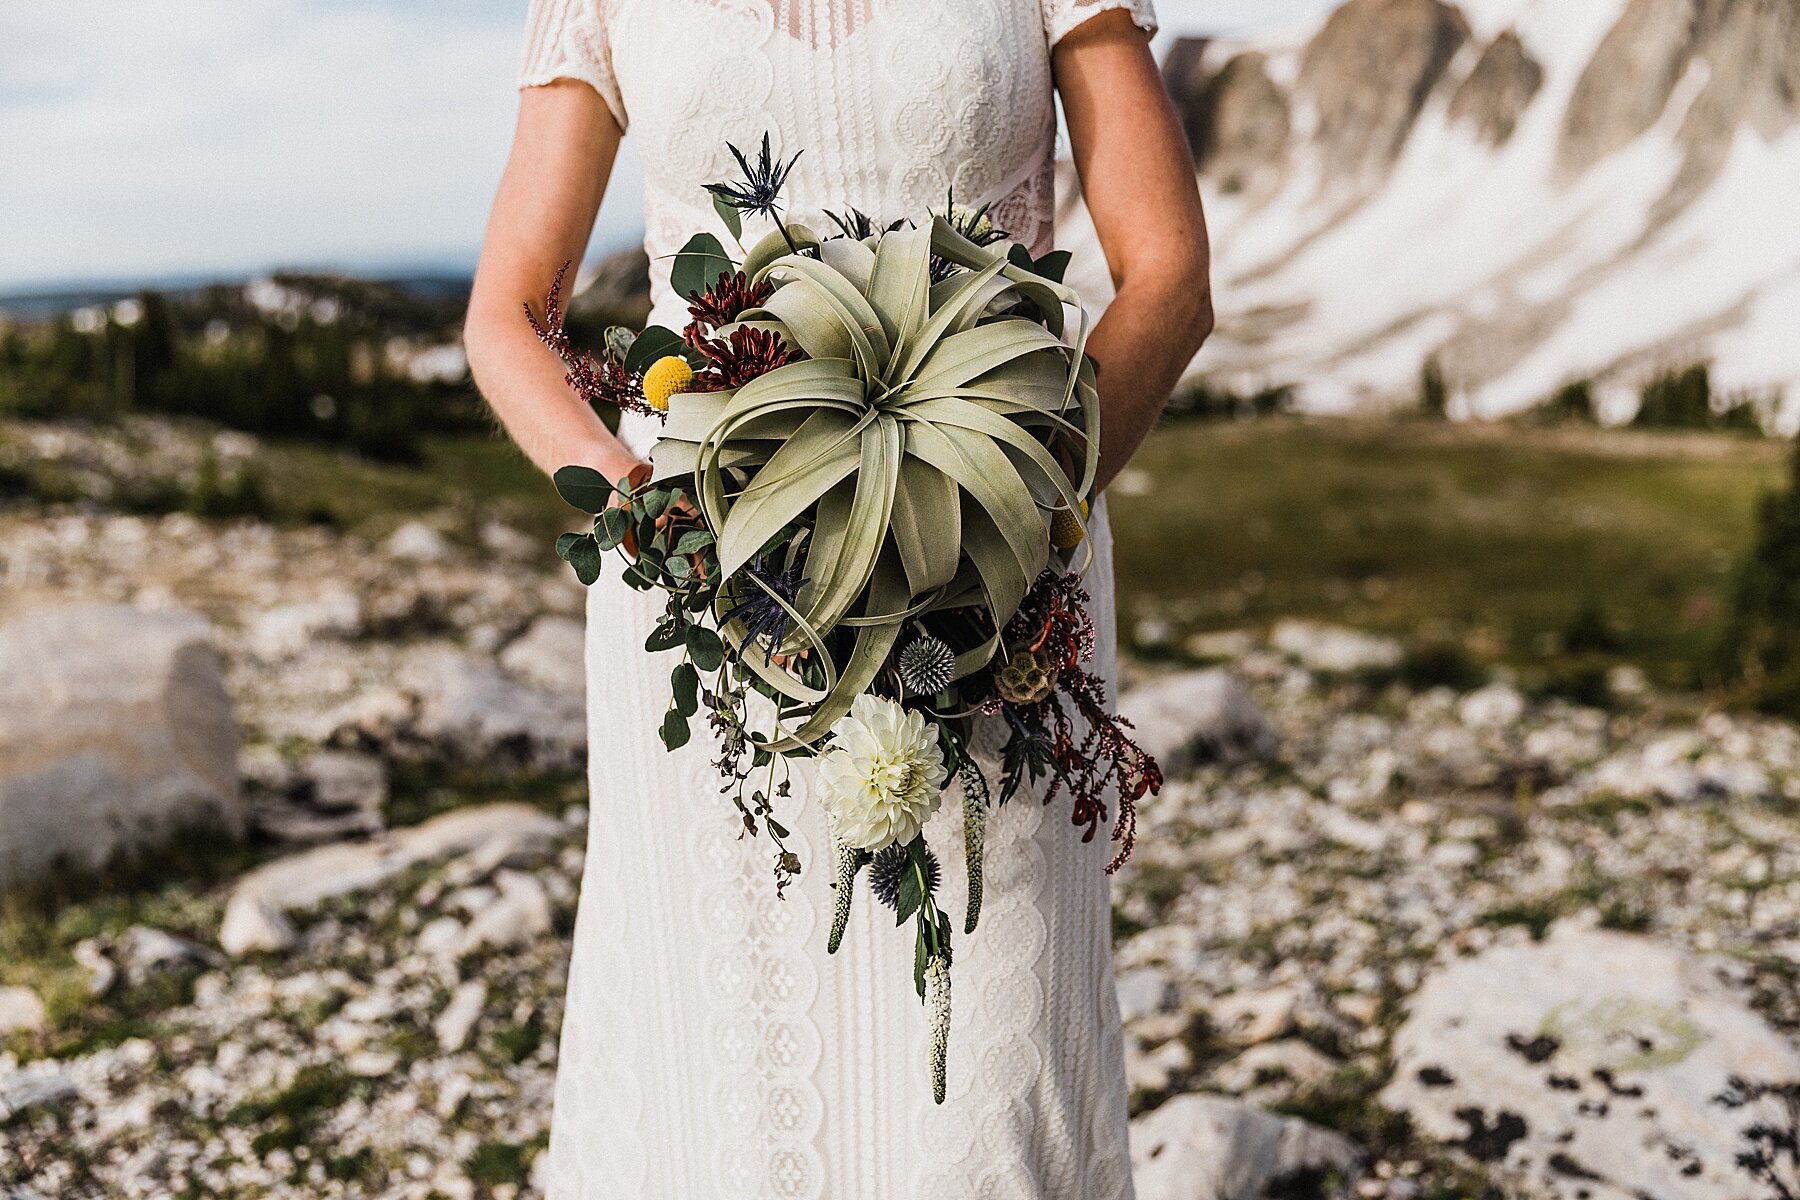 Sunrise Wyoming Hiking Elopement | Vow of the Wild